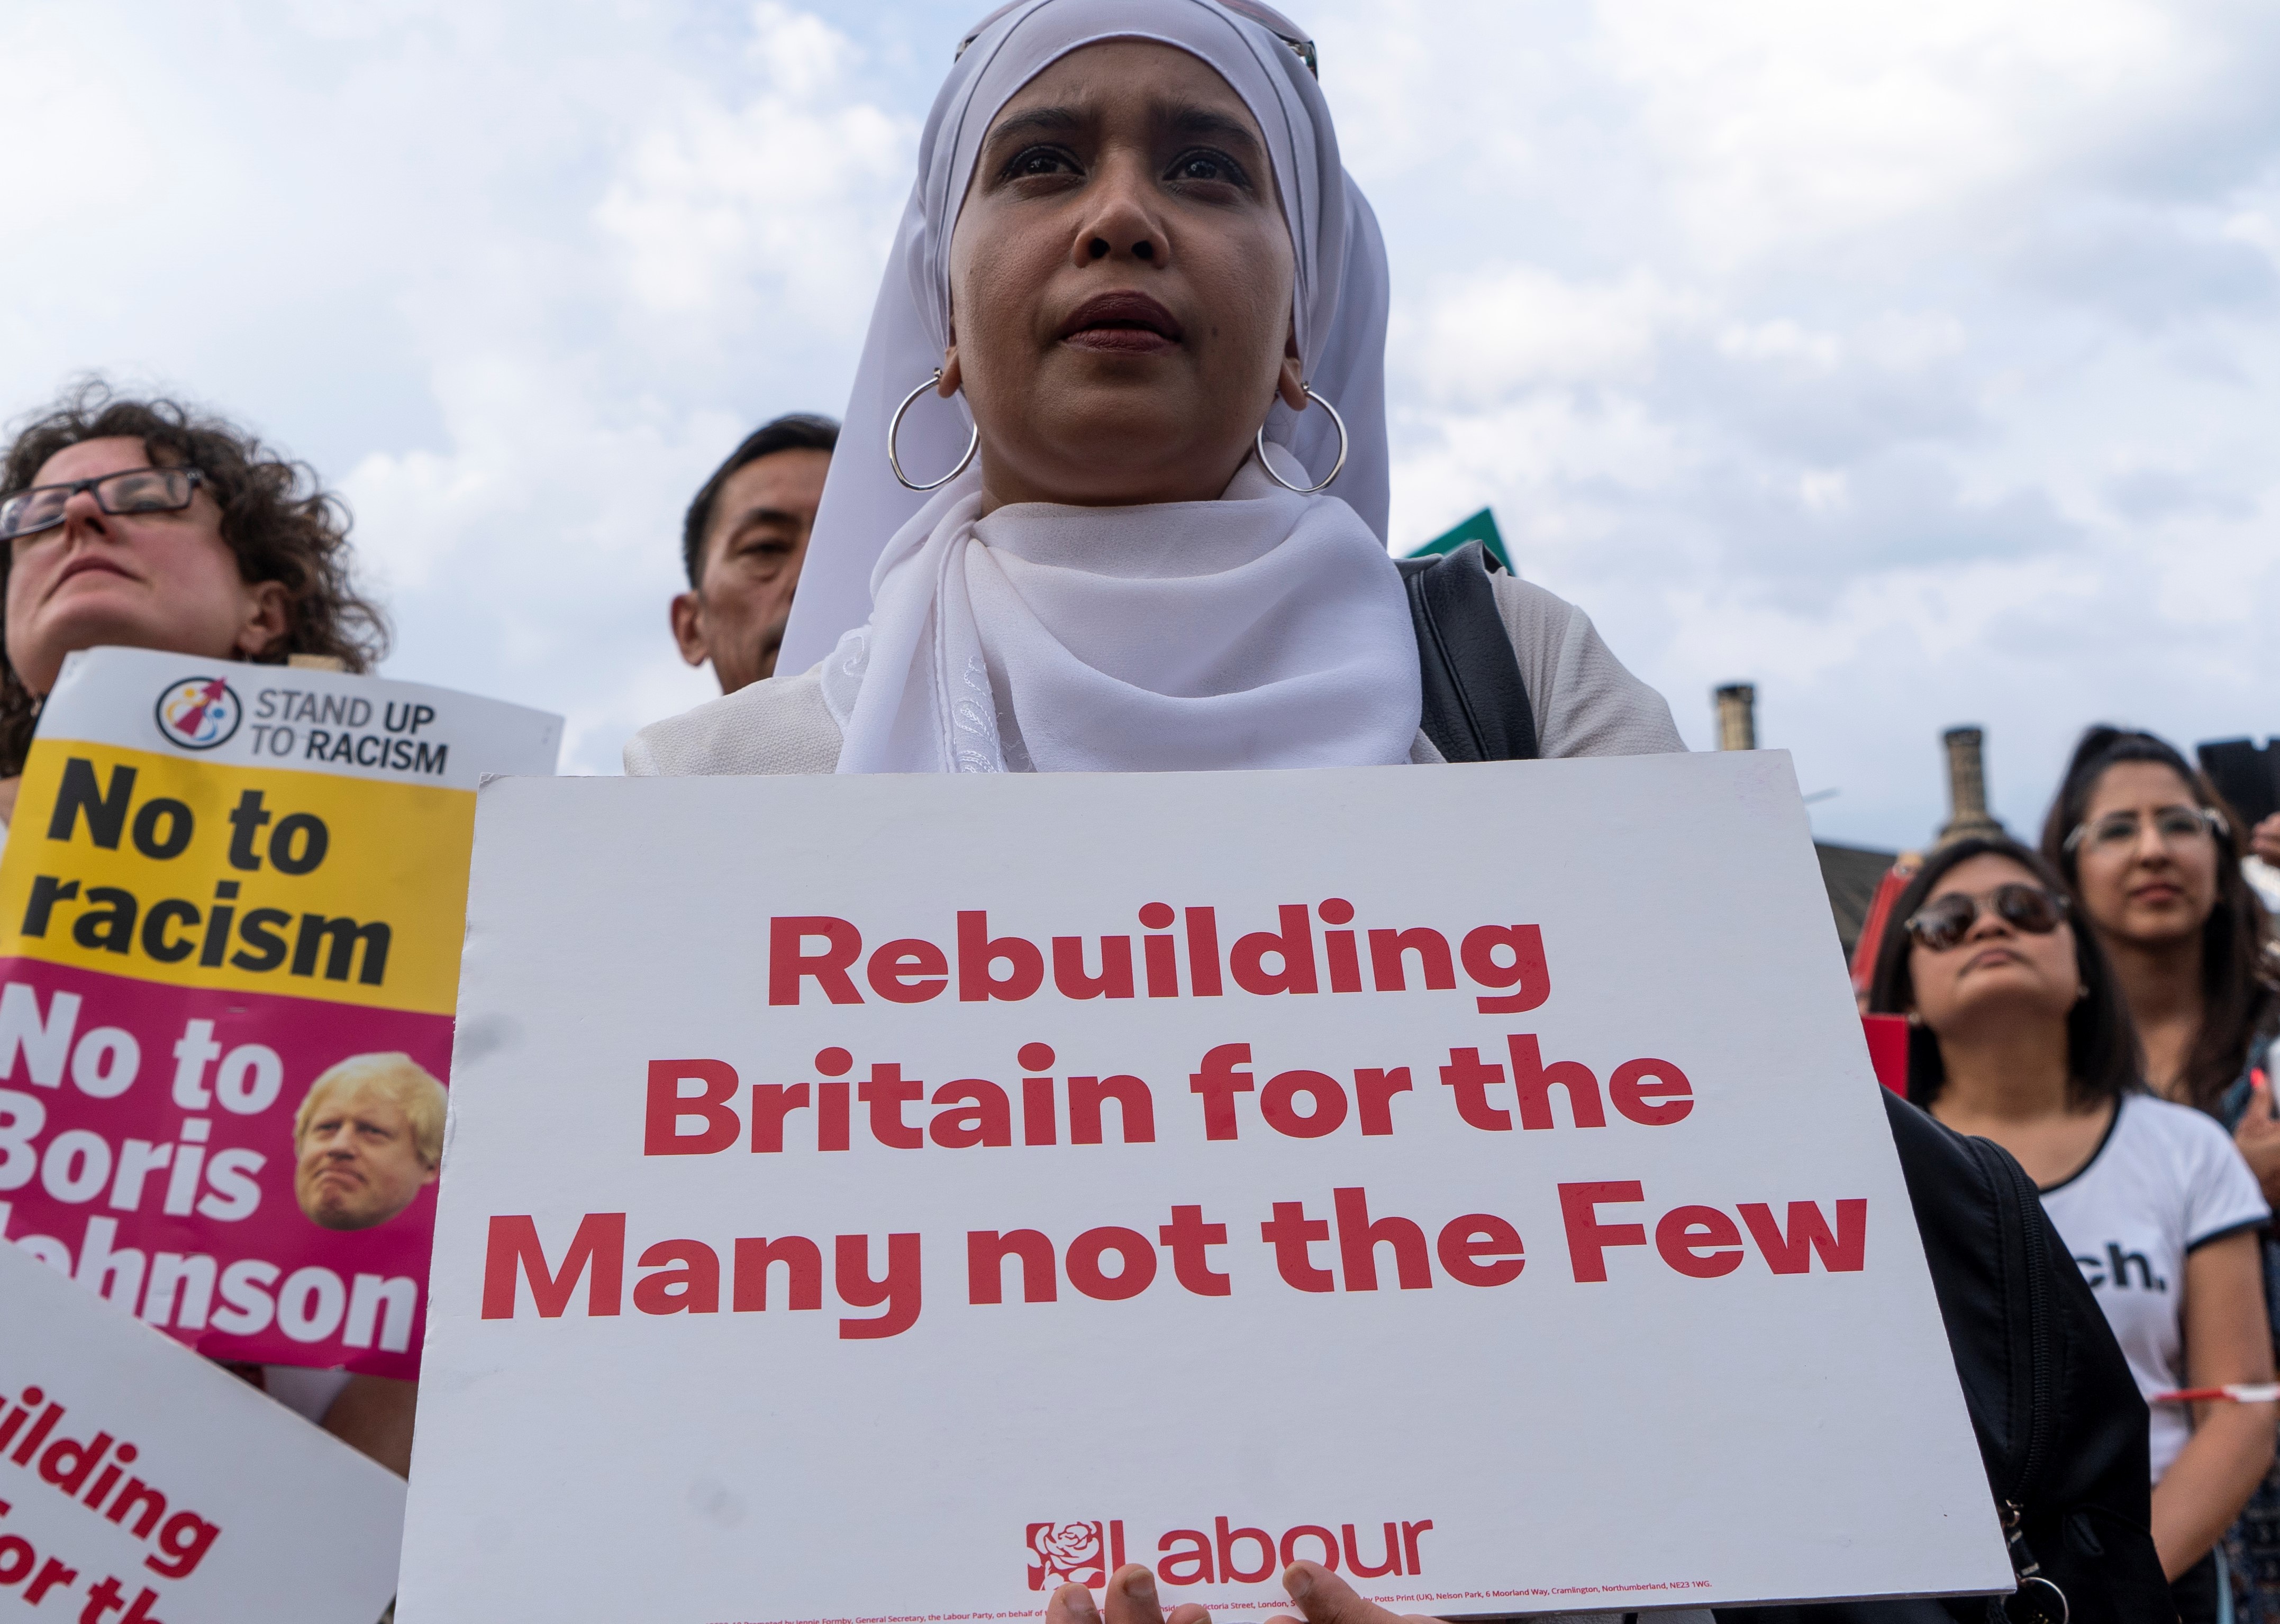 Supporters hold placards as Britain's opposition Labour party leader Jeremy Corbyn addresses a rally calling for a General Election now, in Parliament Square, central London on July 25, 2019.